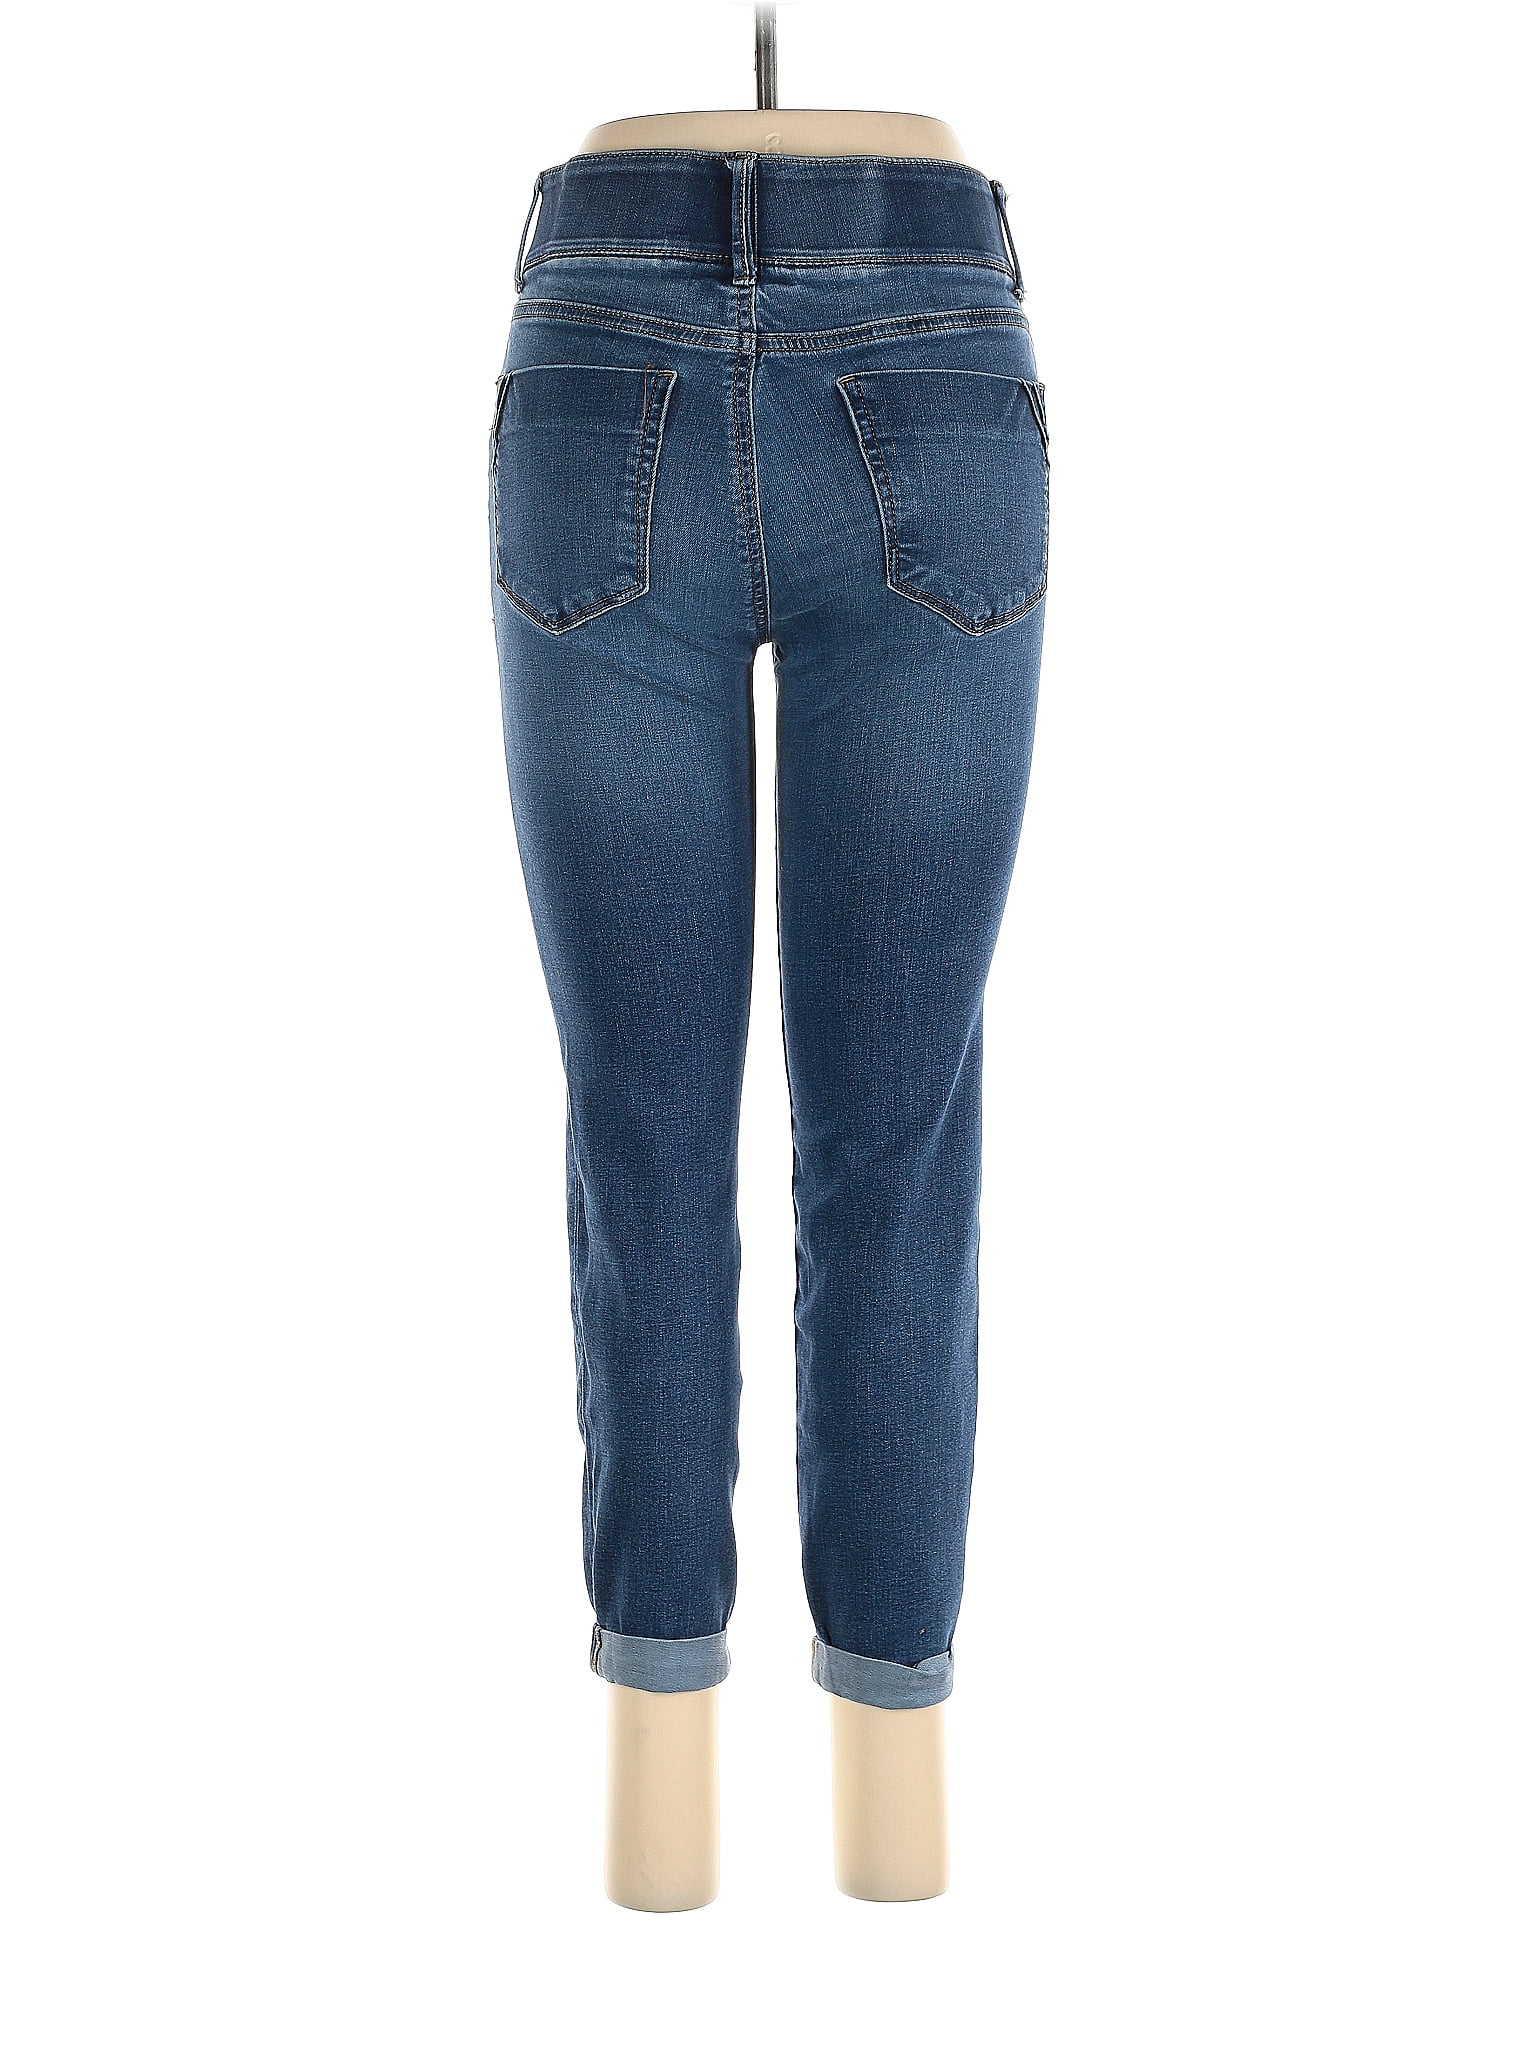 Apt. 9 Blue Jeans for Women for sale